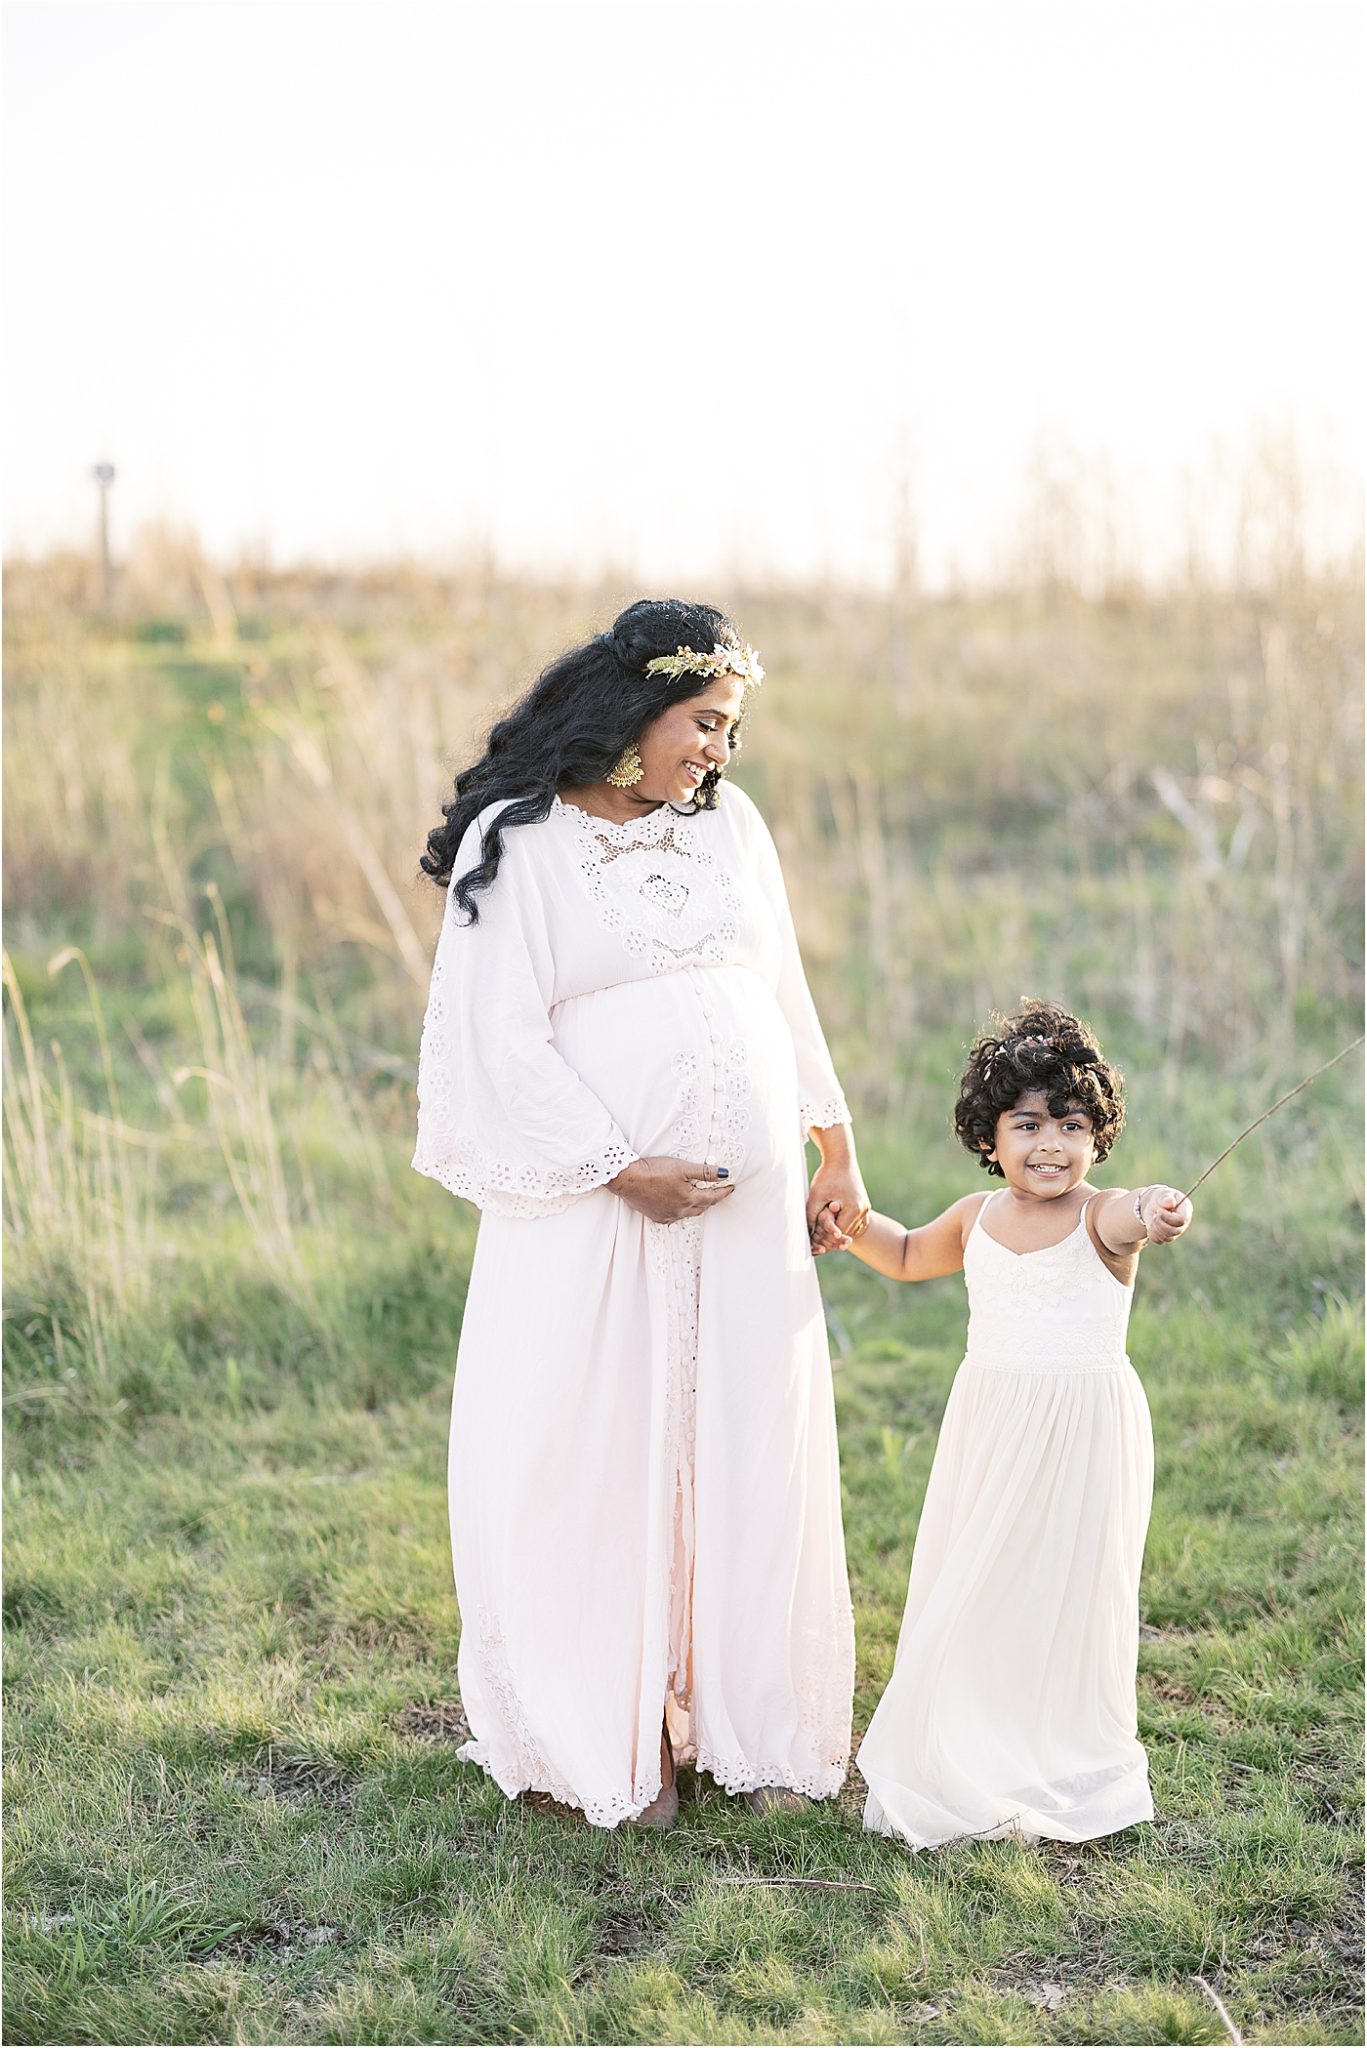 Mom walking with her daughter through field during maternity photoshoot. Photo by Lindsay Konopa Photography.